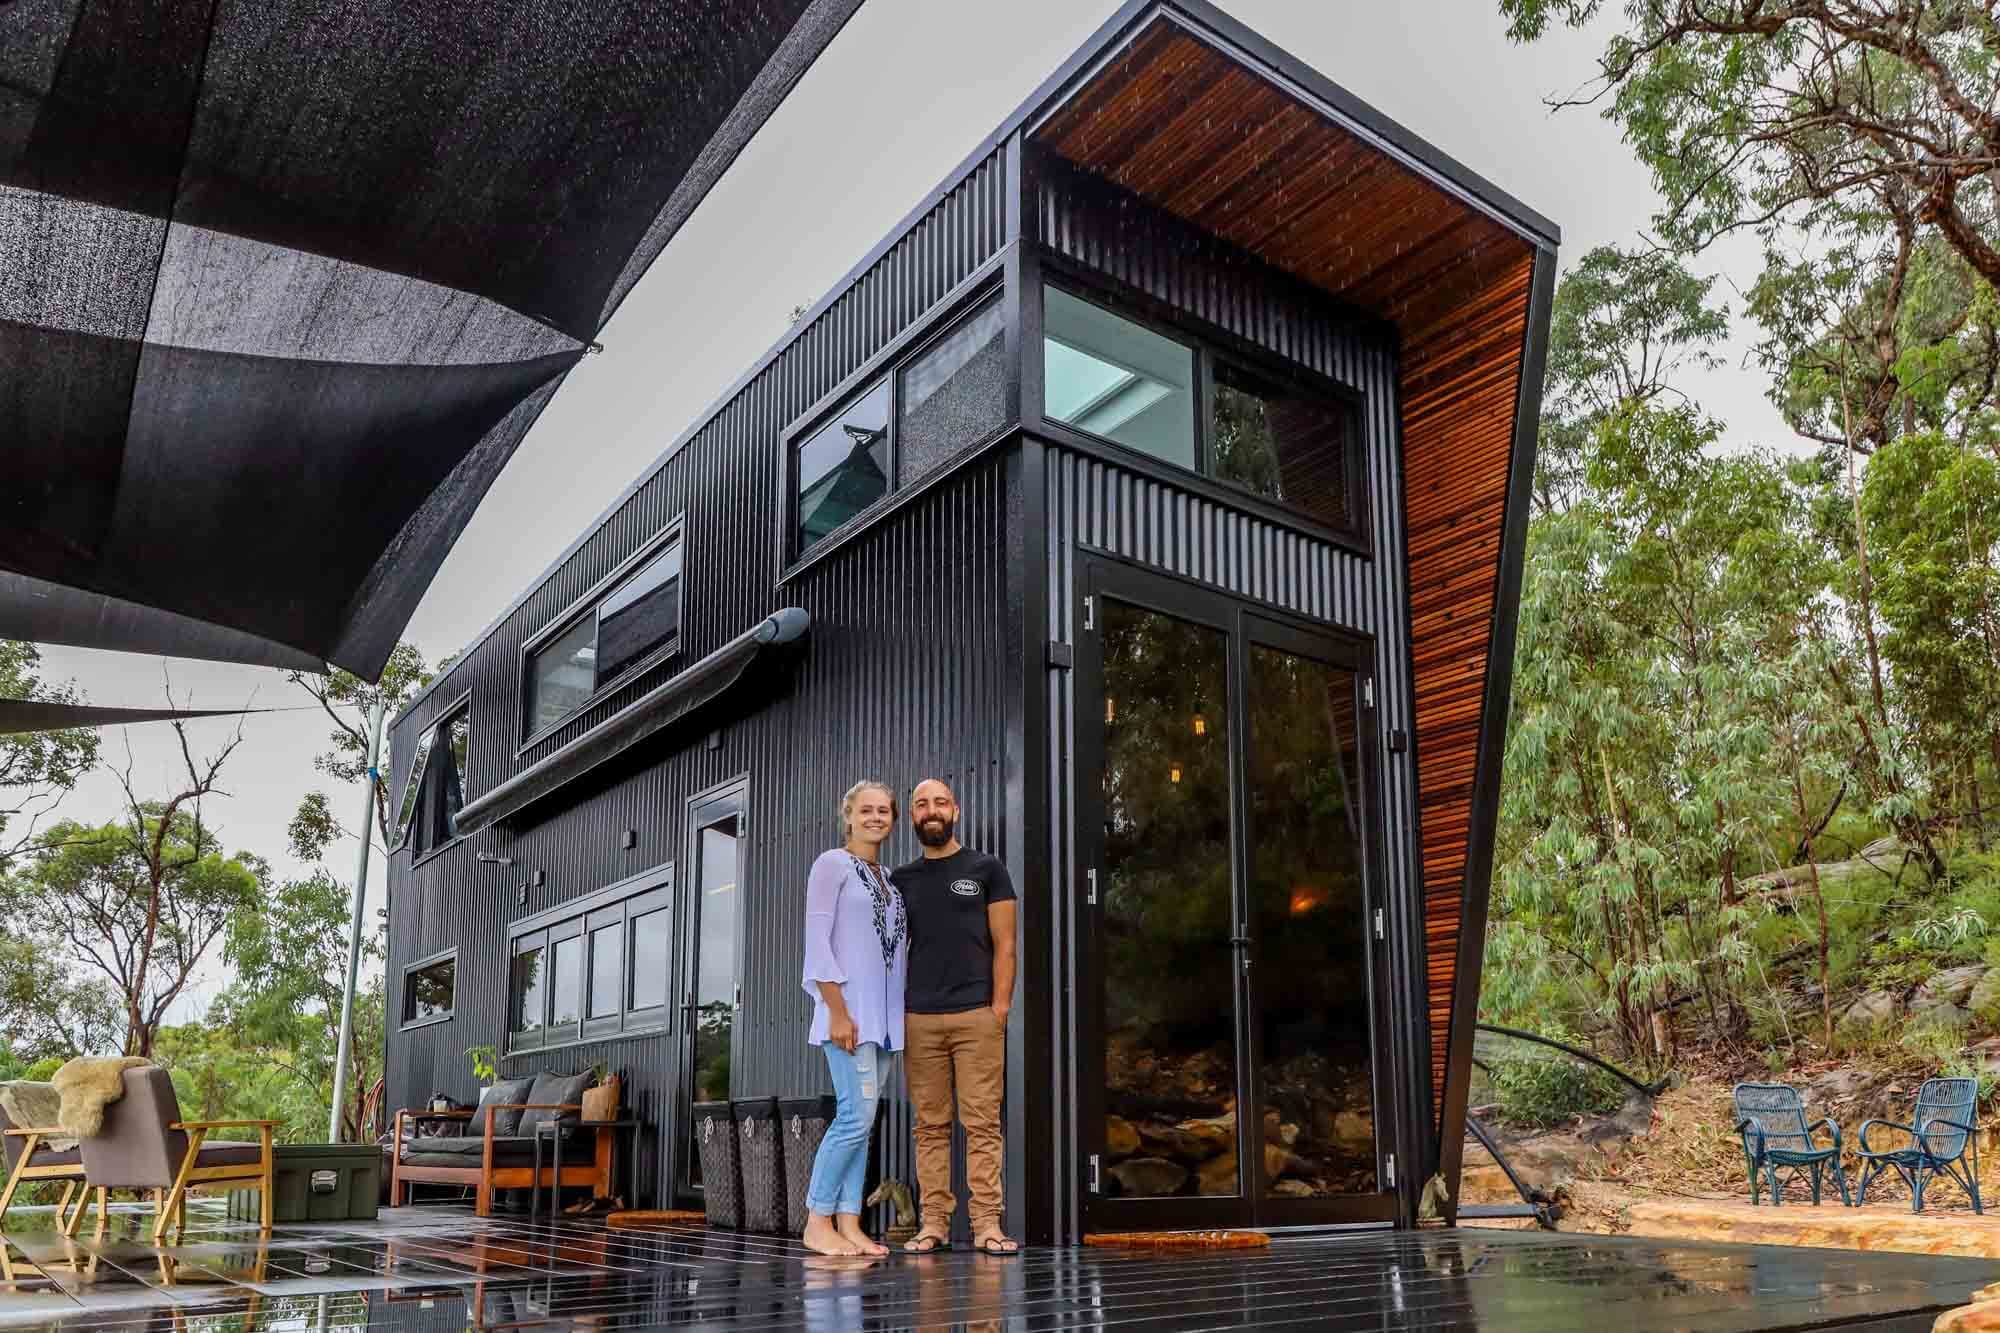  Living  Big in a Tiny House  This Ultra Modern Tiny House  Will Blow Your Mind